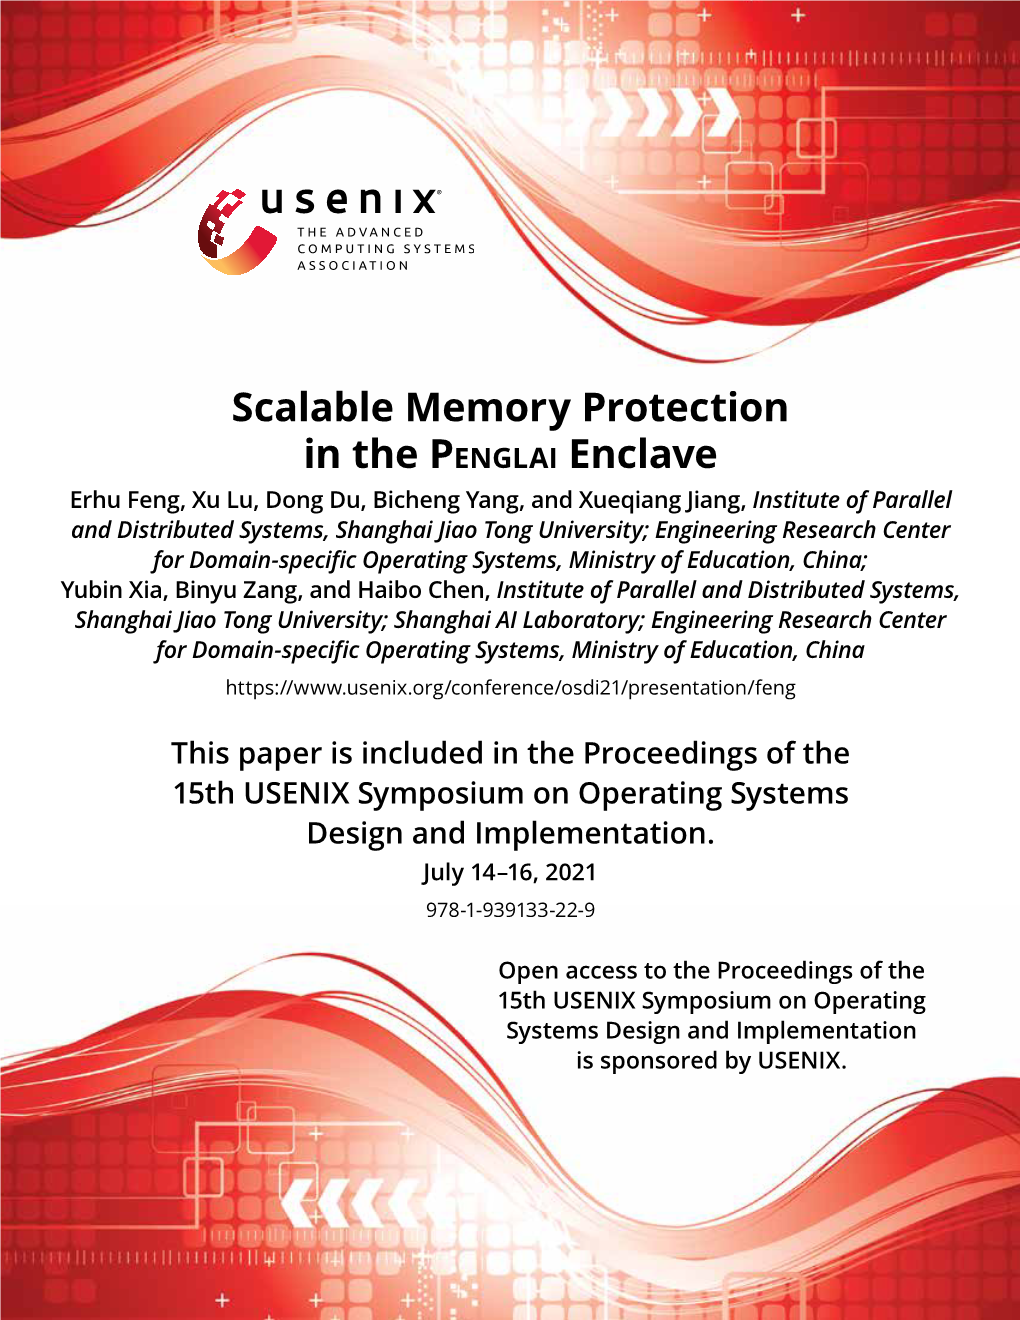 Scalable Memory Protection in the Penglai Enclave